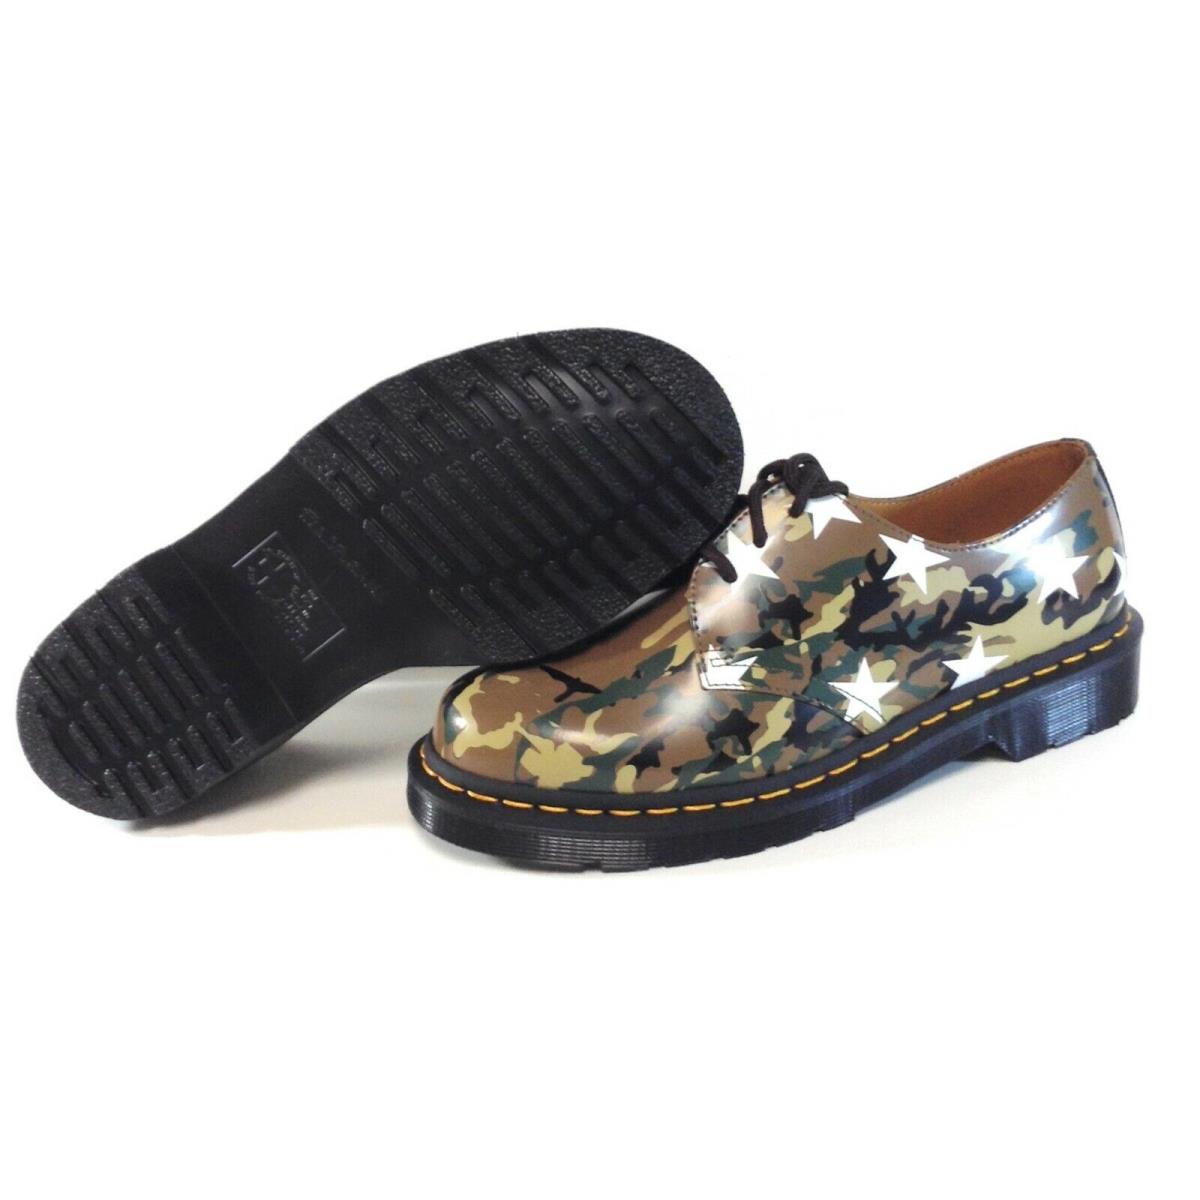 Mens Womens Dr Martens X Sophnet 1461 Military Camo Star Printed Smooth Shoes